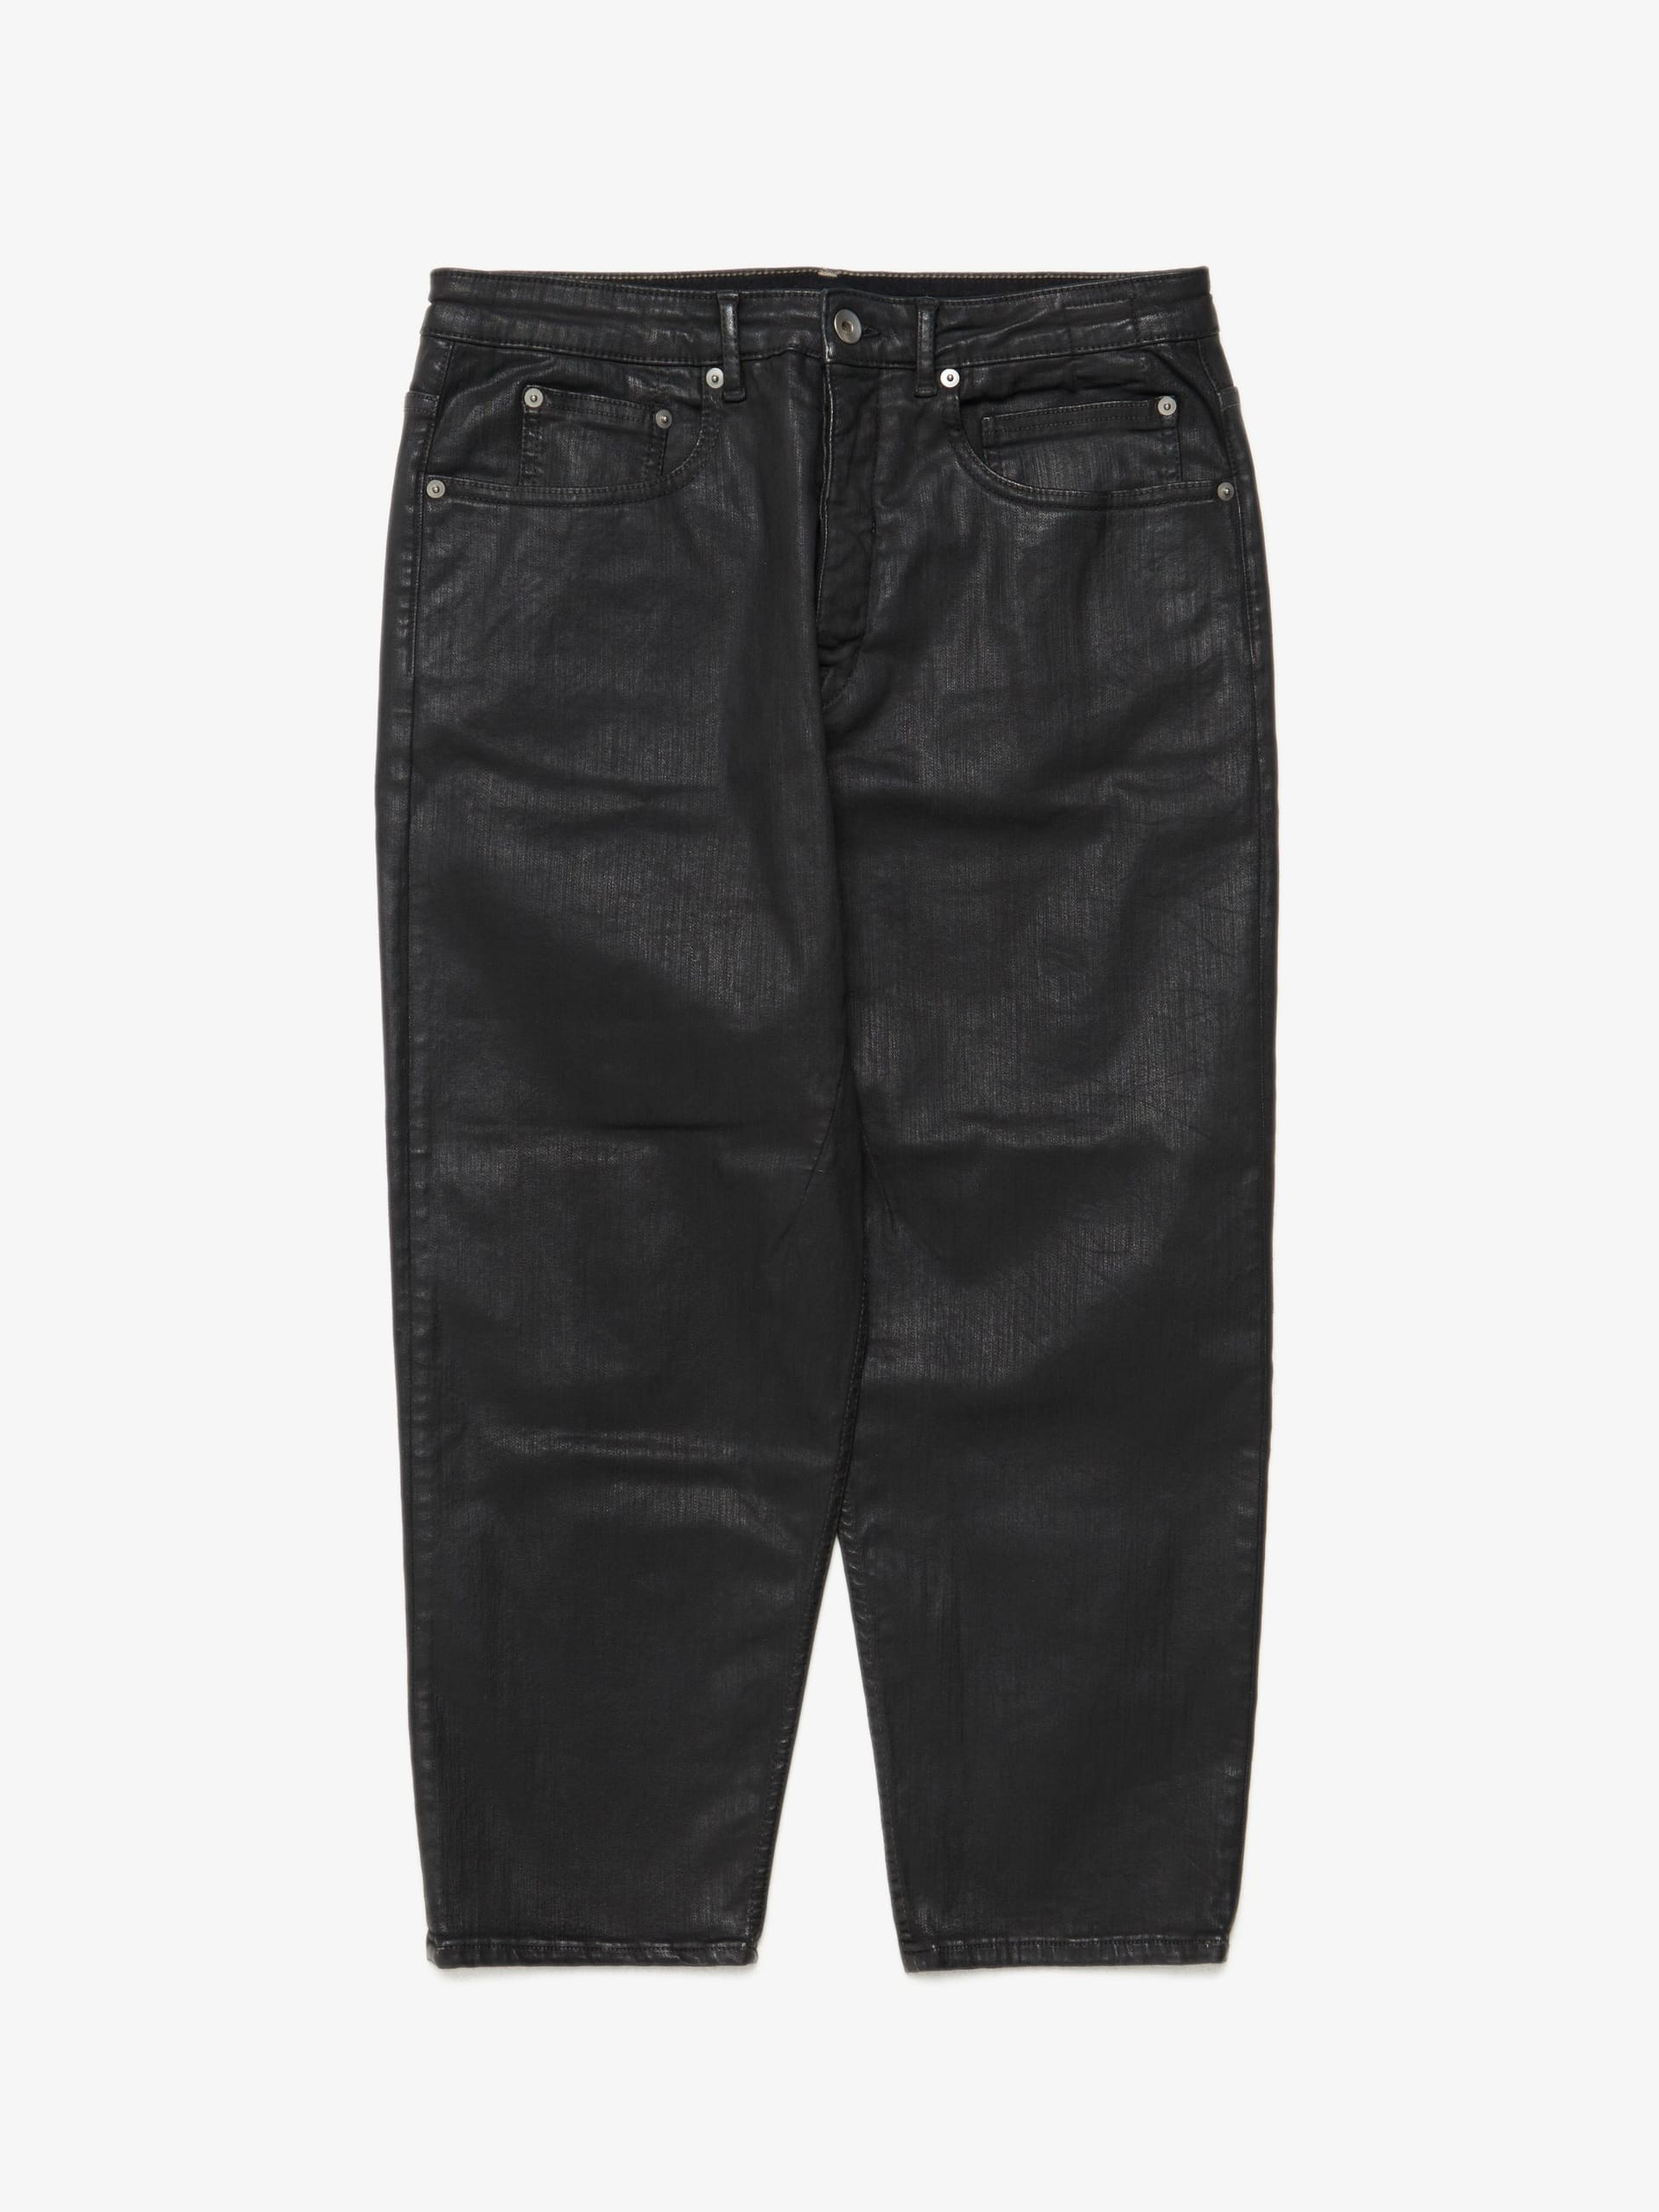 Rick Owens Drkshdw Collapse Cropped Black Waxed Denim